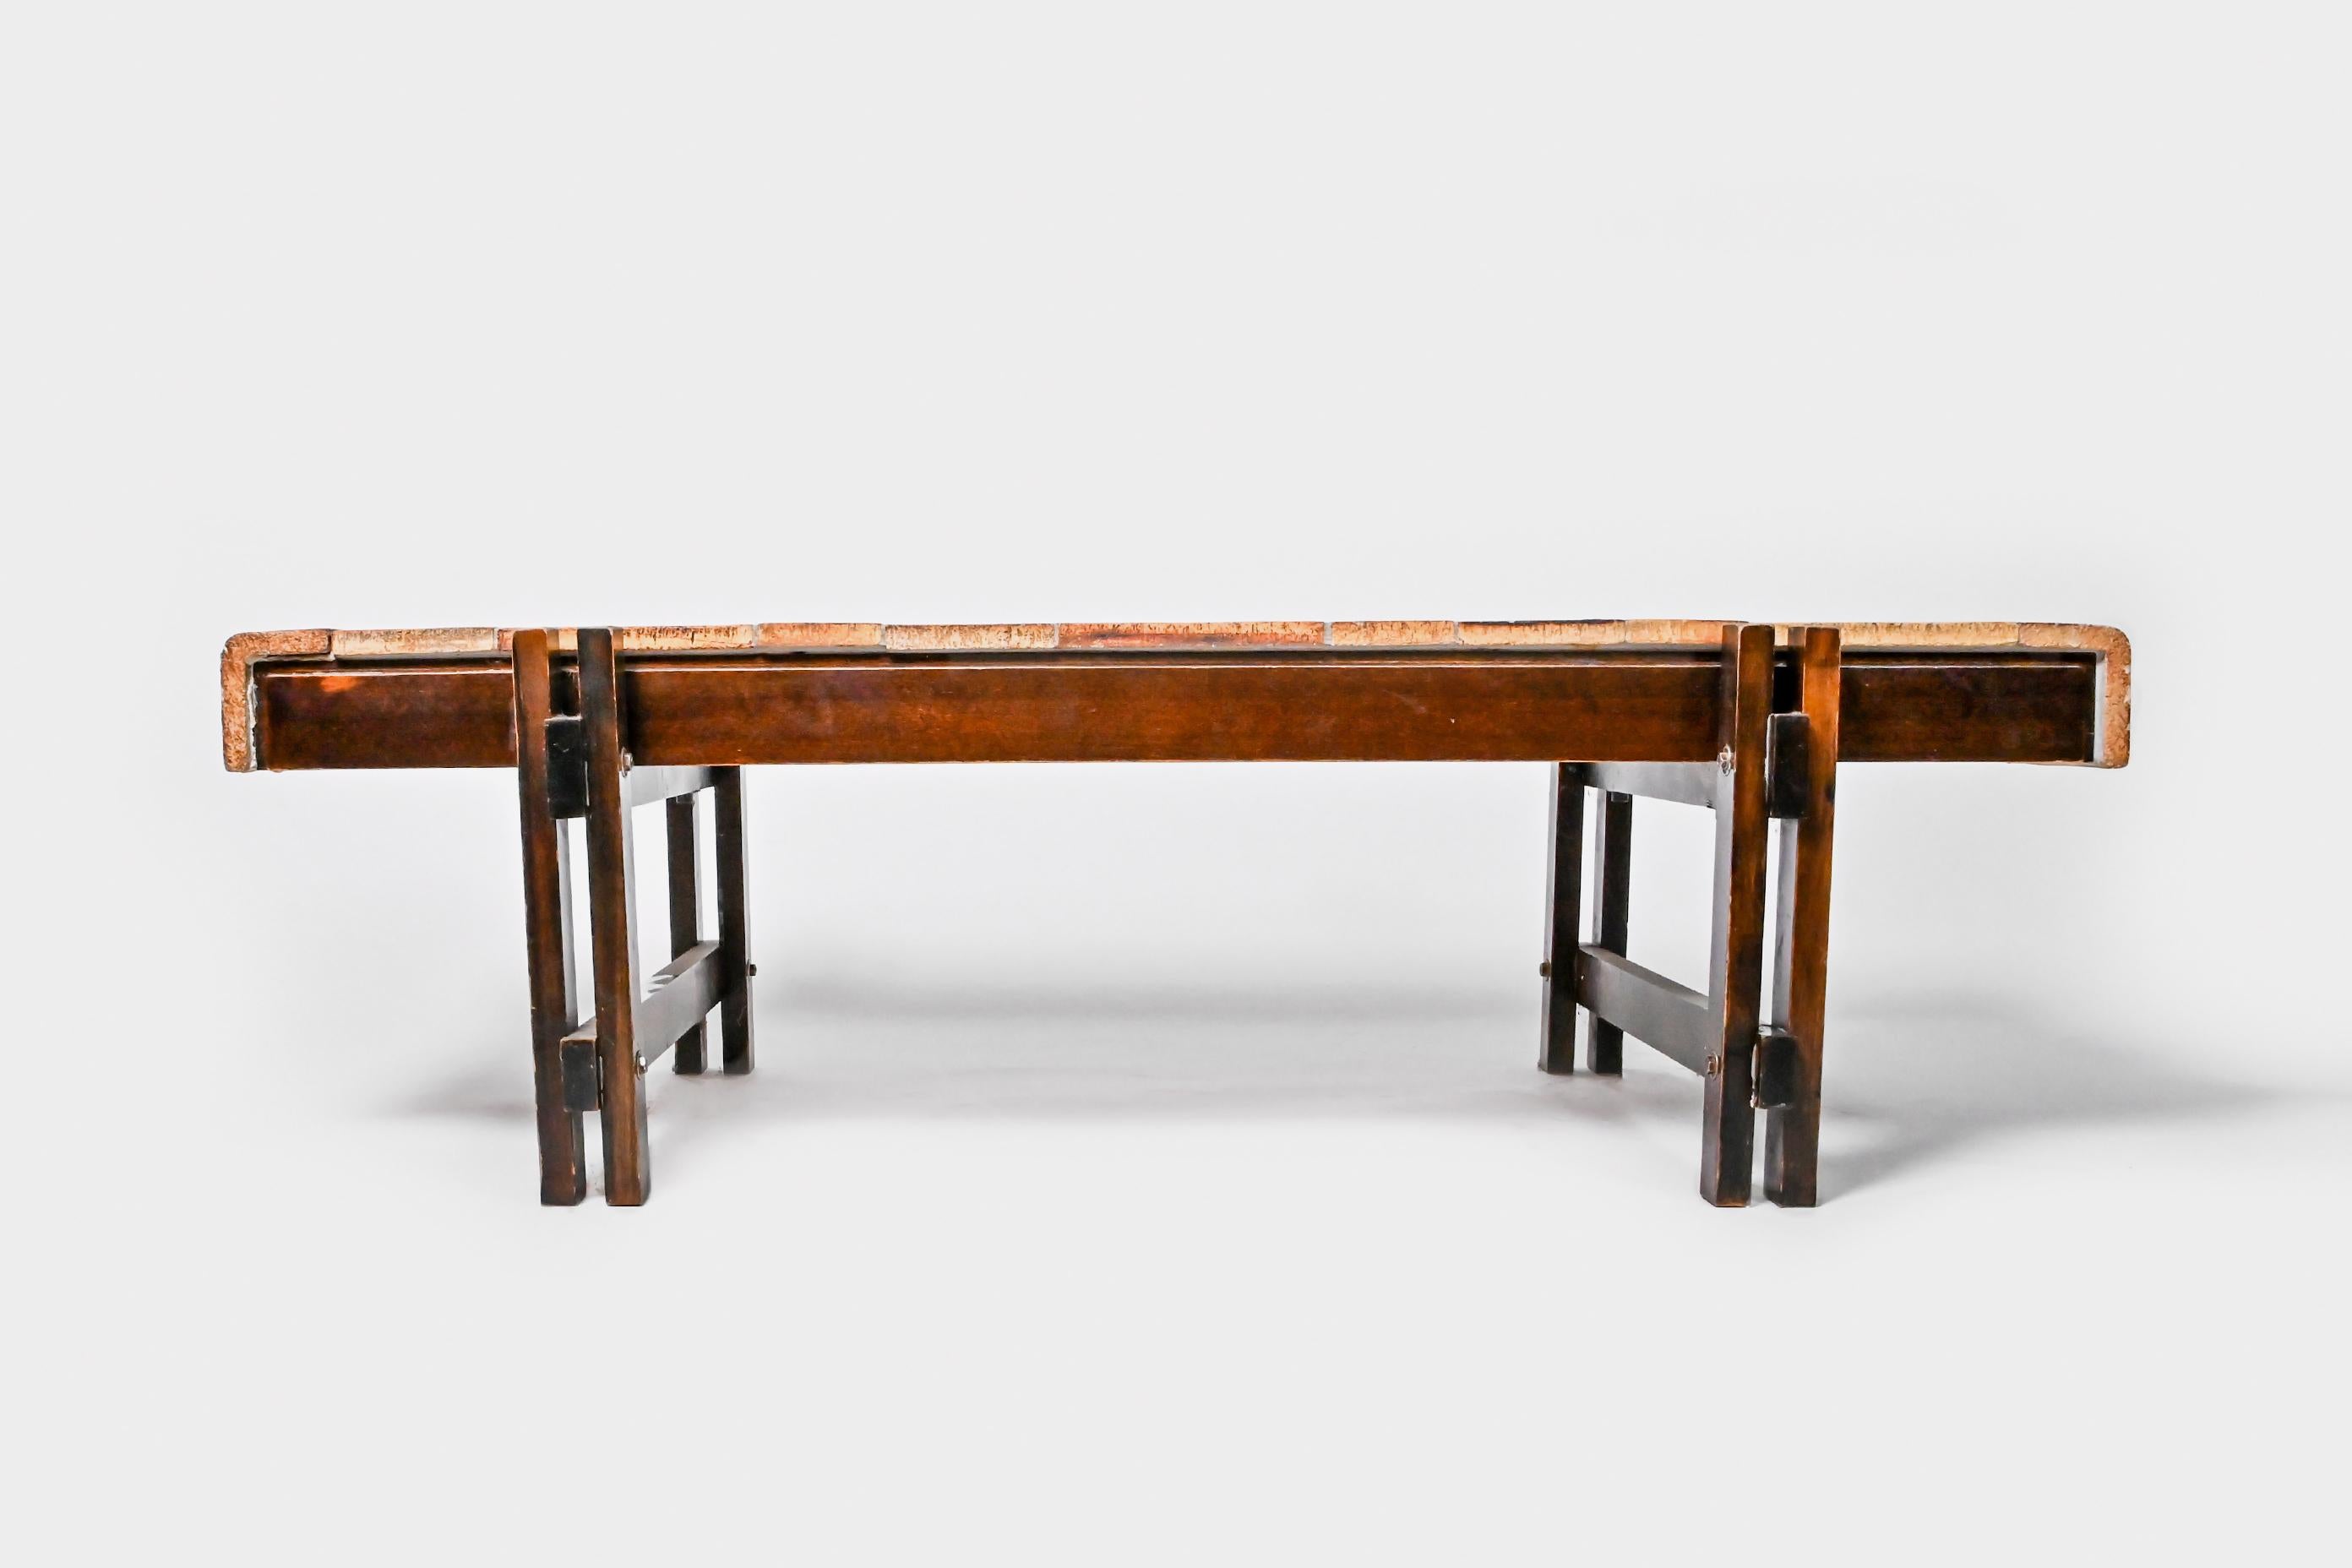 Coffee table from the garrigue series by the French designer Roger Capron for Vallauris in the 1970s.